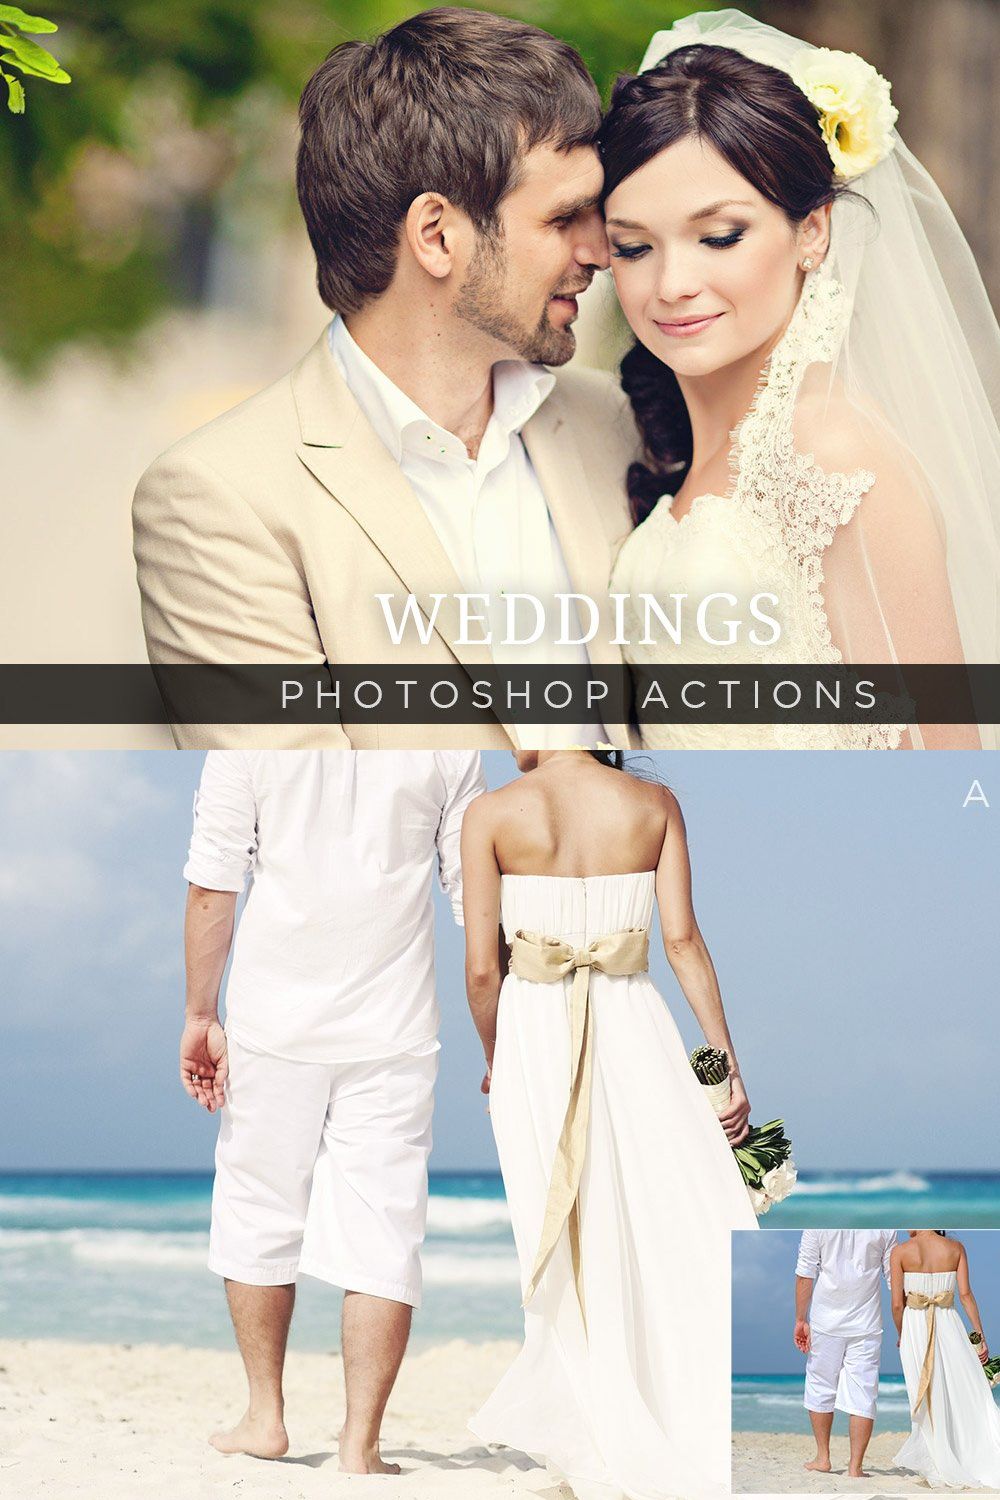 Weddings Photoshop Actions Volume 1 pinterest preview image.